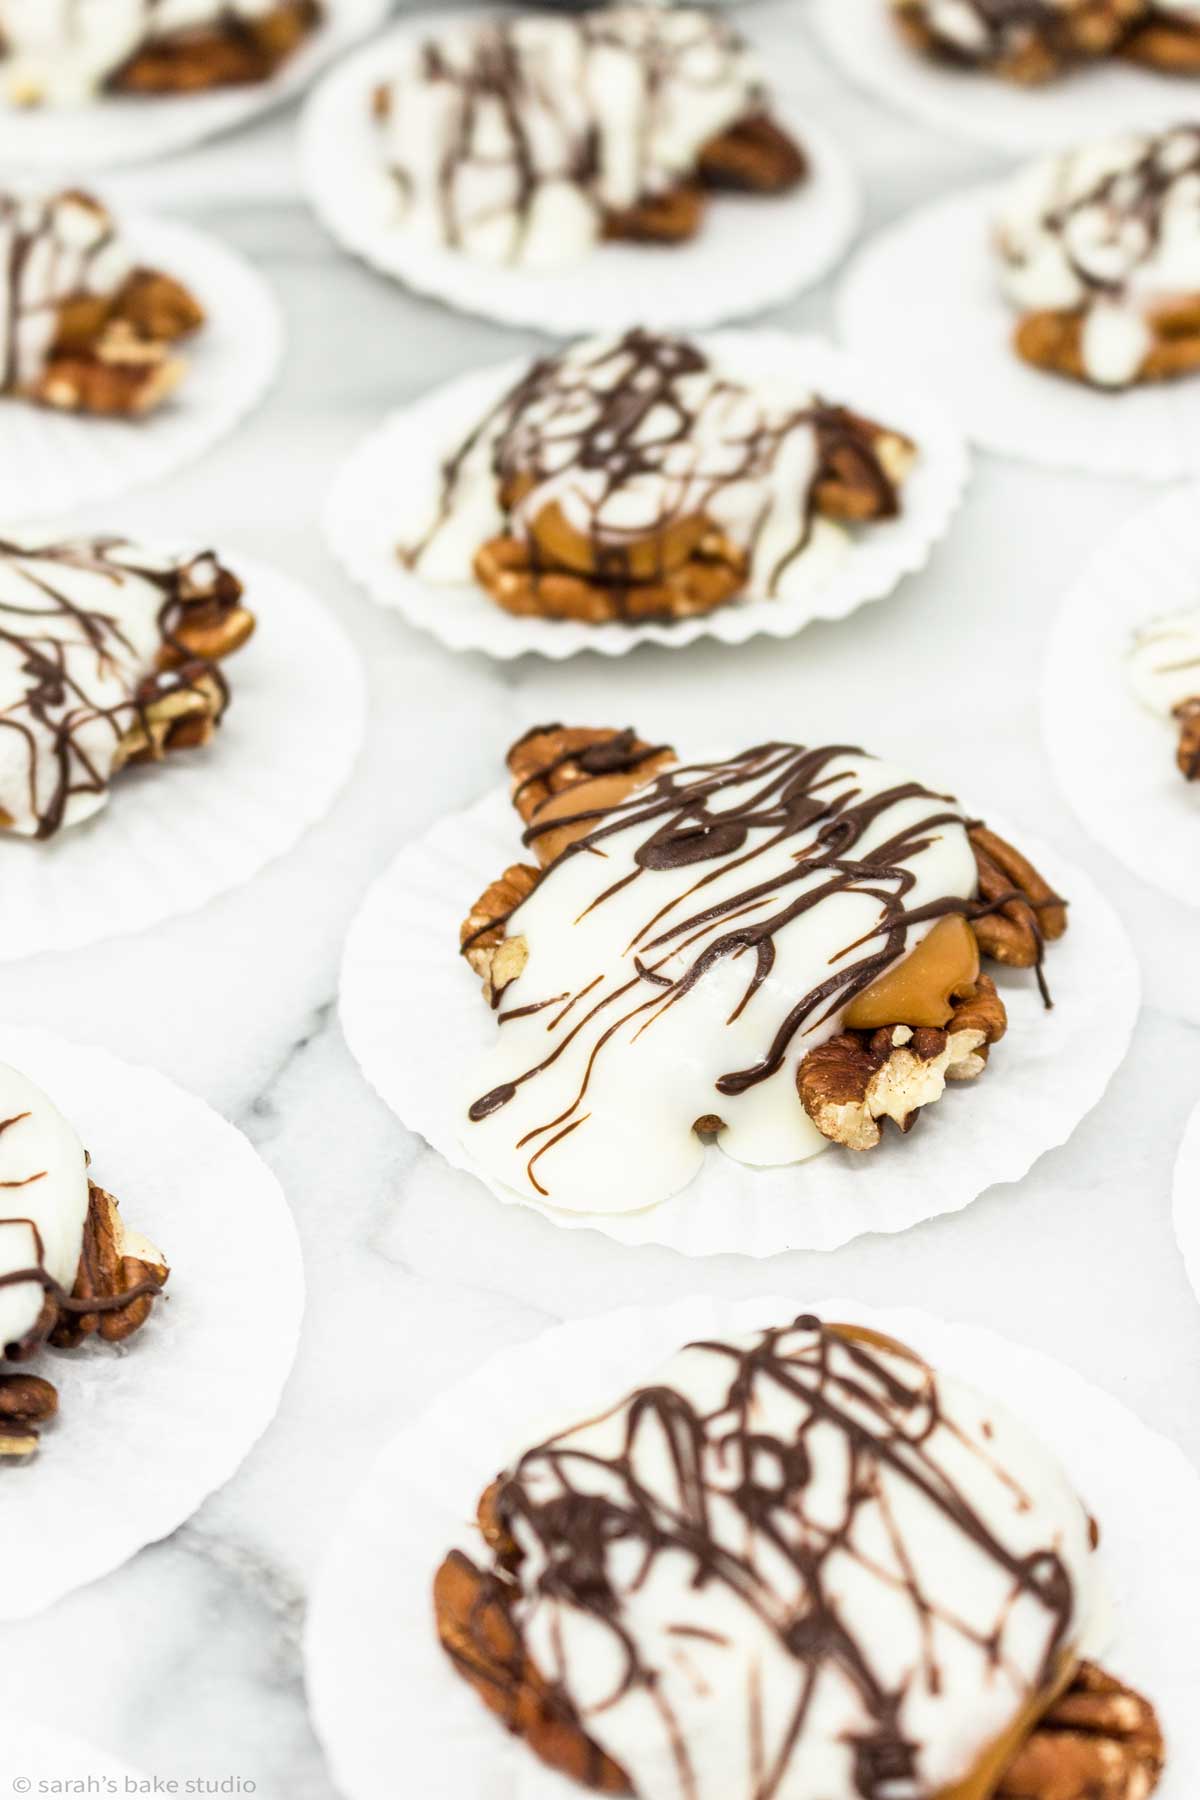 Caramel Pecan Turtles - soft gooey caramel, sweet white chocolate, and toasted pecan nutty goodness.